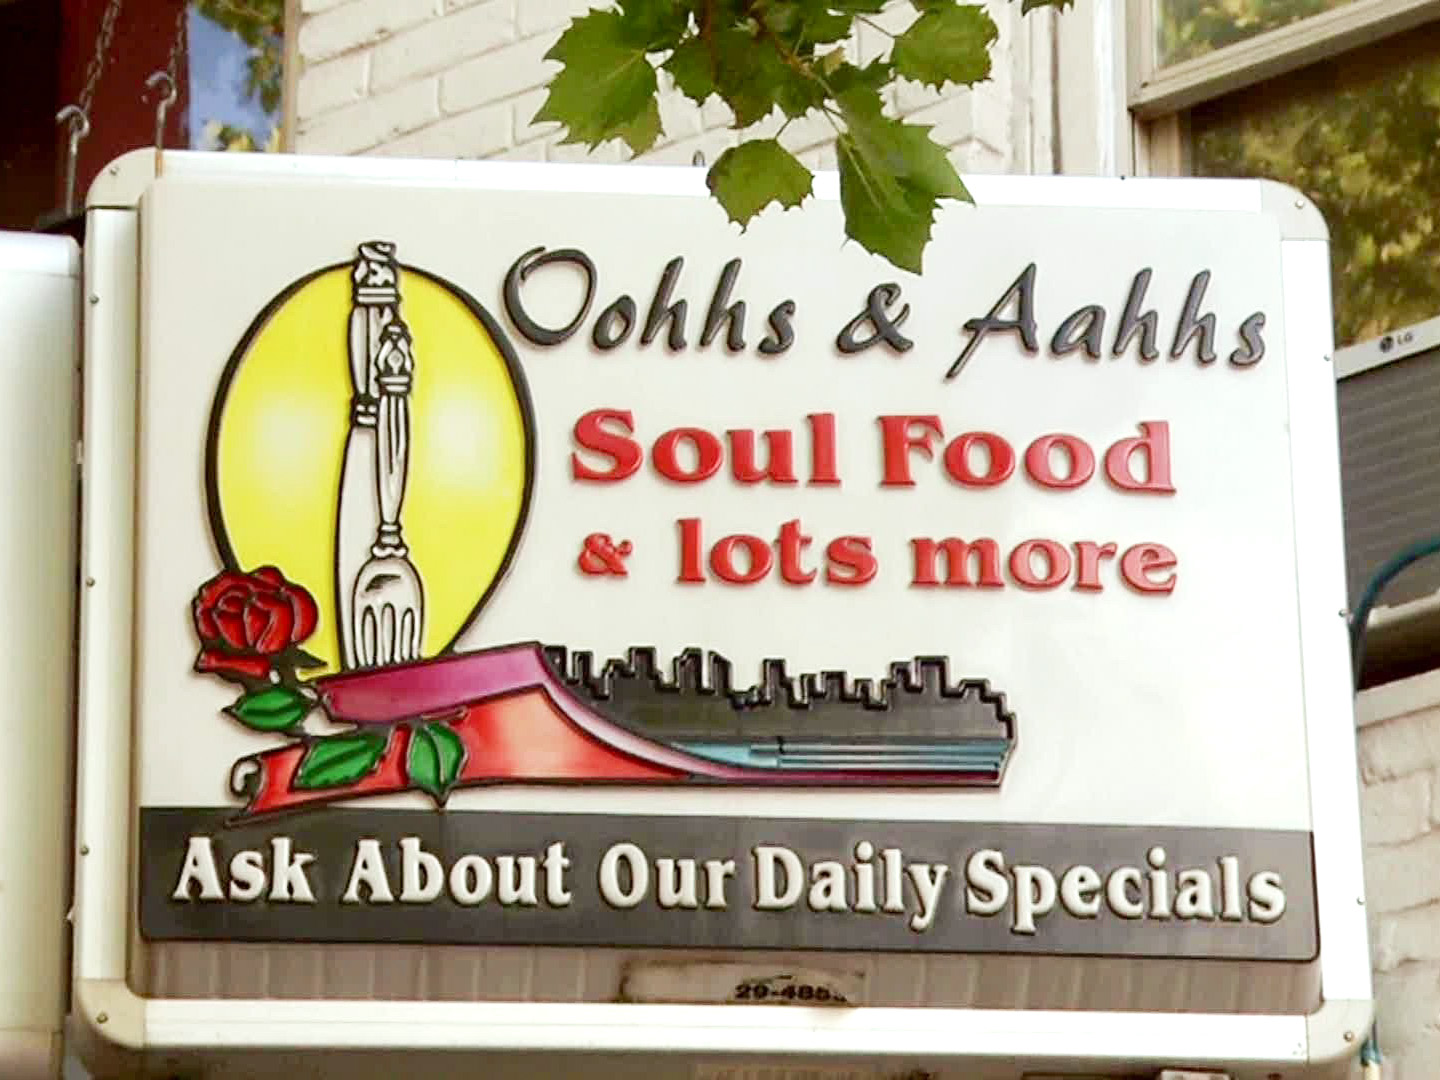 Oohhs & Aahhs Restaurant will make you do exactly that — go “ooh” and “aah.” This joint is the real deal when it comes to soul food, as they use classic recipes passed down from the two owners’ grandmothers. Guy can’t get enough of the shrimp and grits or the spicy Buffalo wings with fries.